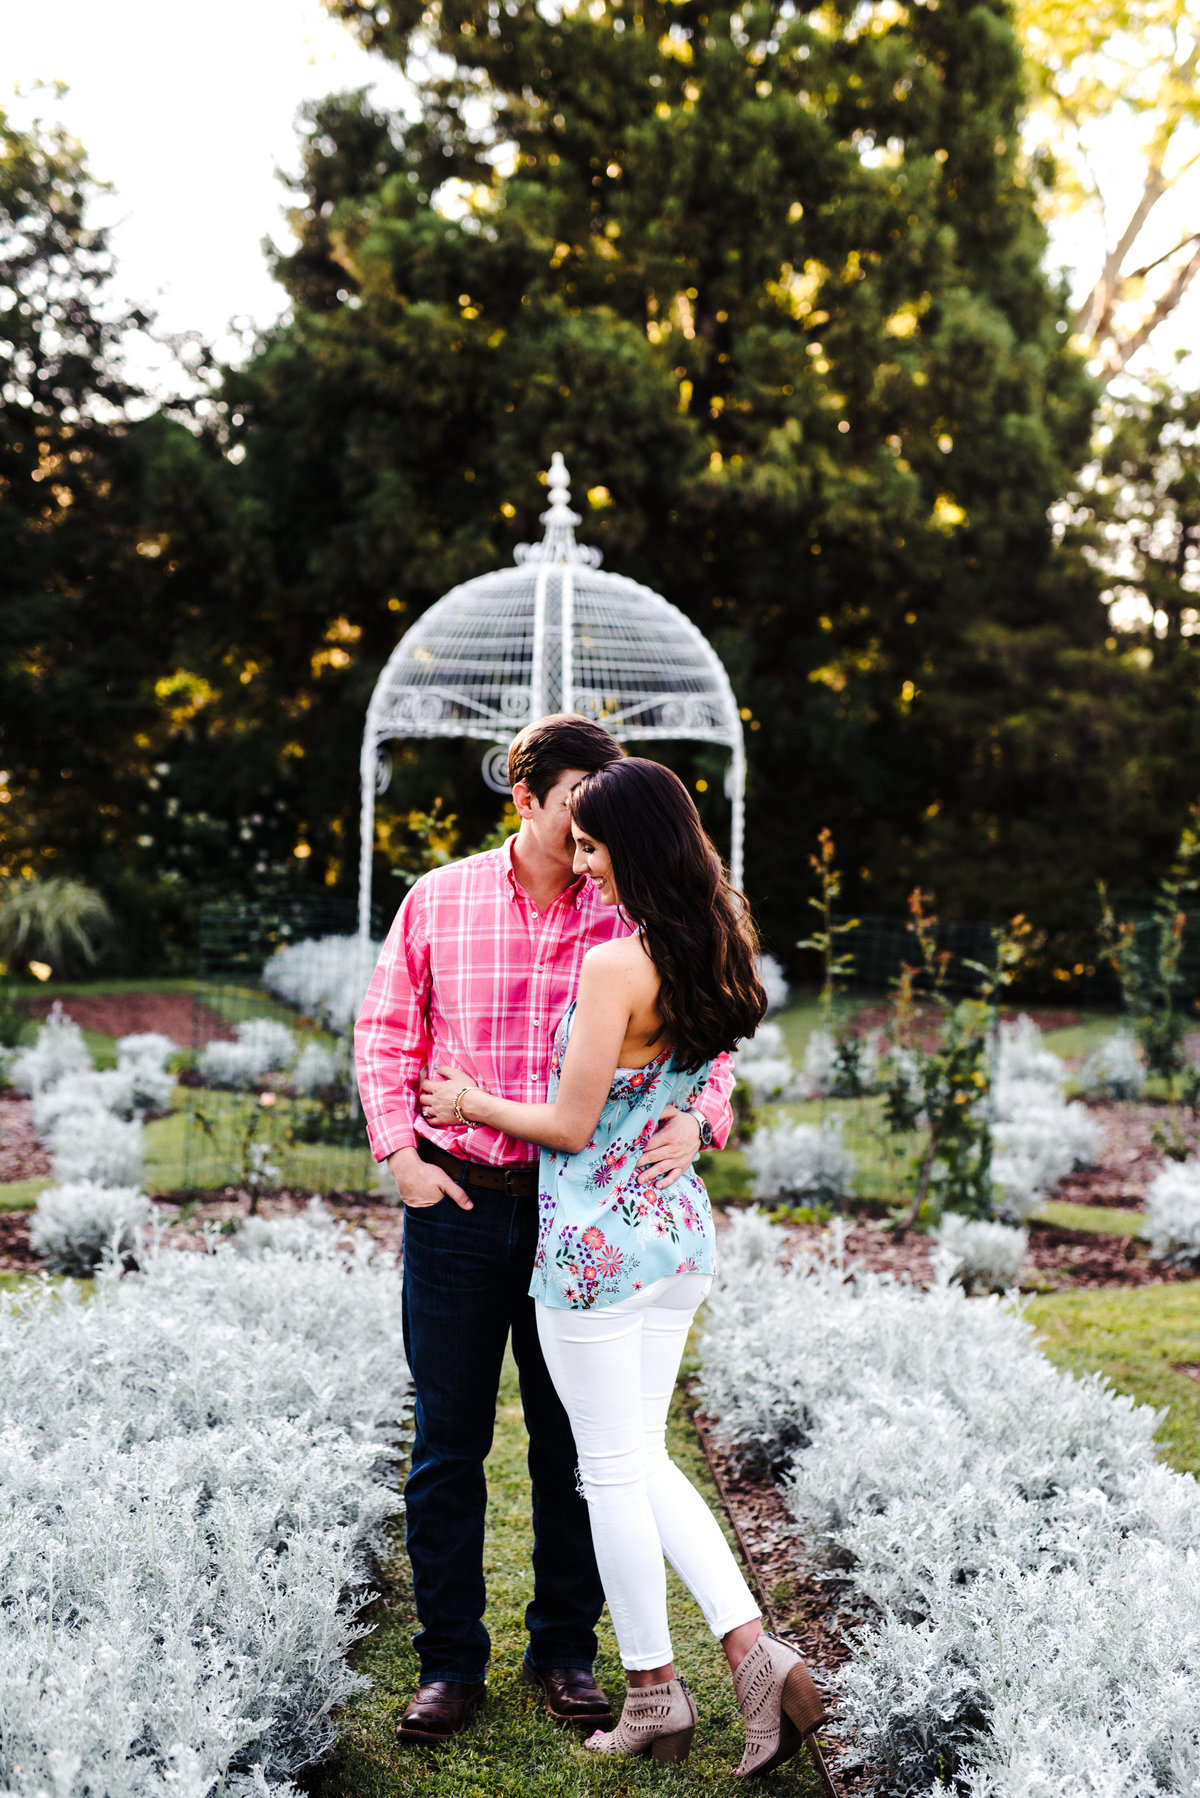 Hills and Dales Estate Engagement Session - 25